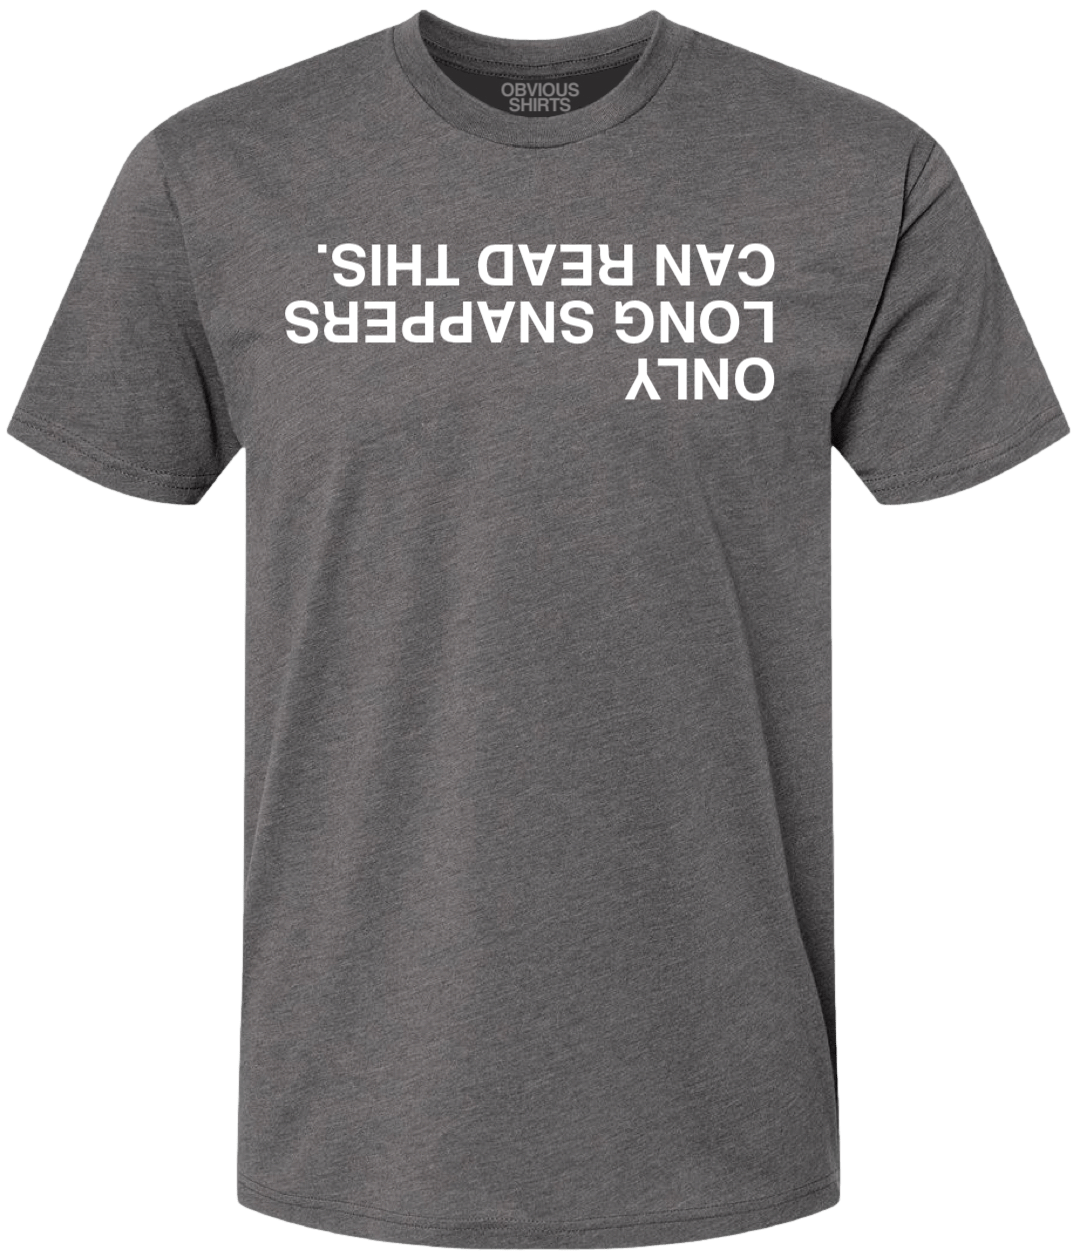 ONLY LONG SNAPPERS CAN READ THIS. (METAL GREY) - OBVIOUS SHIRTS